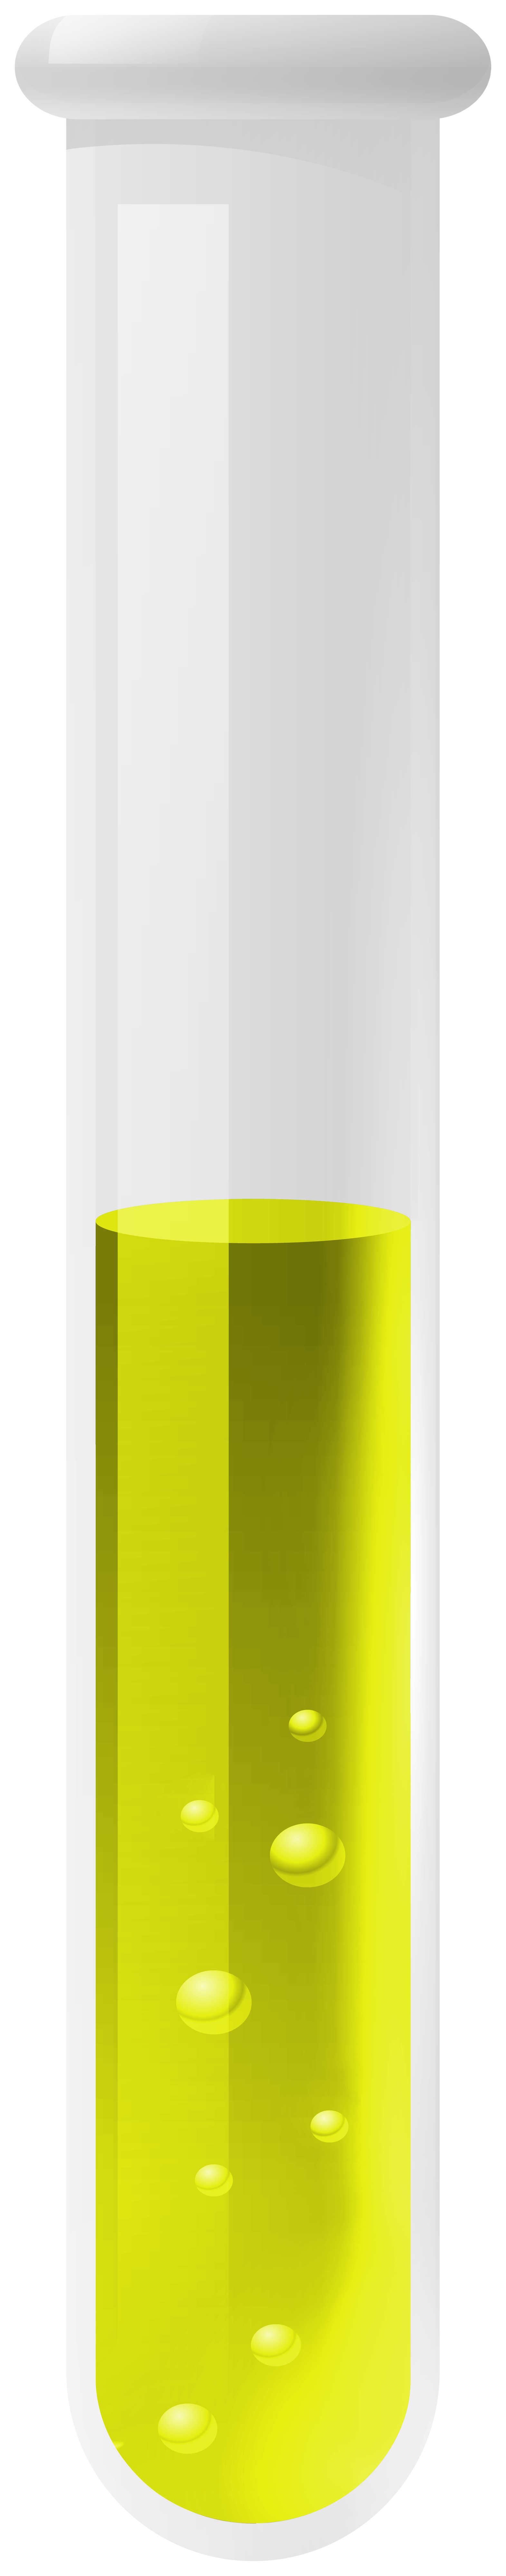 Lab Test Tube Yellow Png Clipart Gallery Yopriceville High Quality Images And Transparent Png Free Clipart